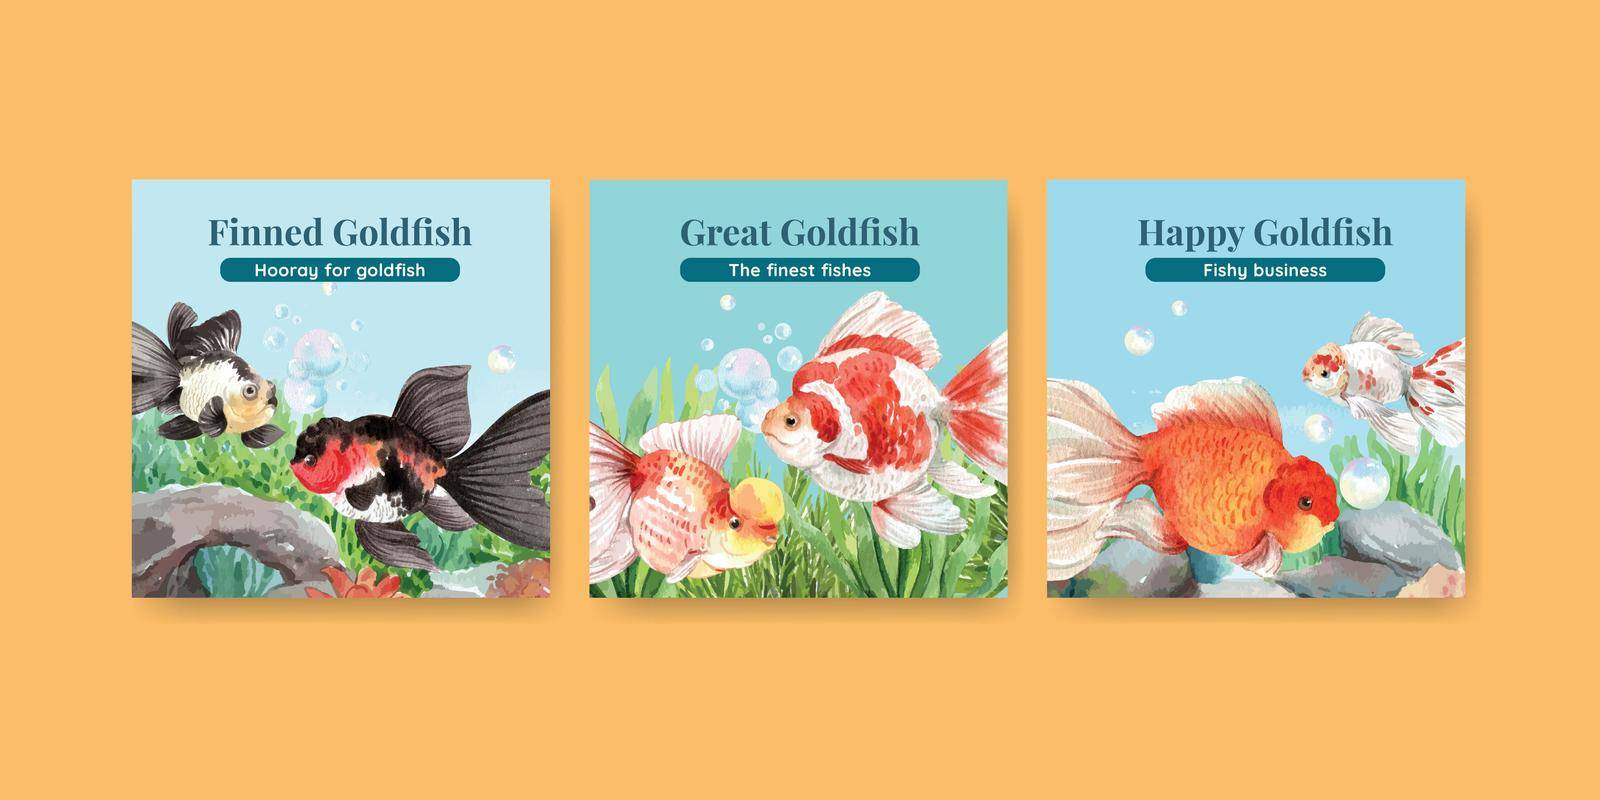 Banner template with gold fish concept,watercolor style.